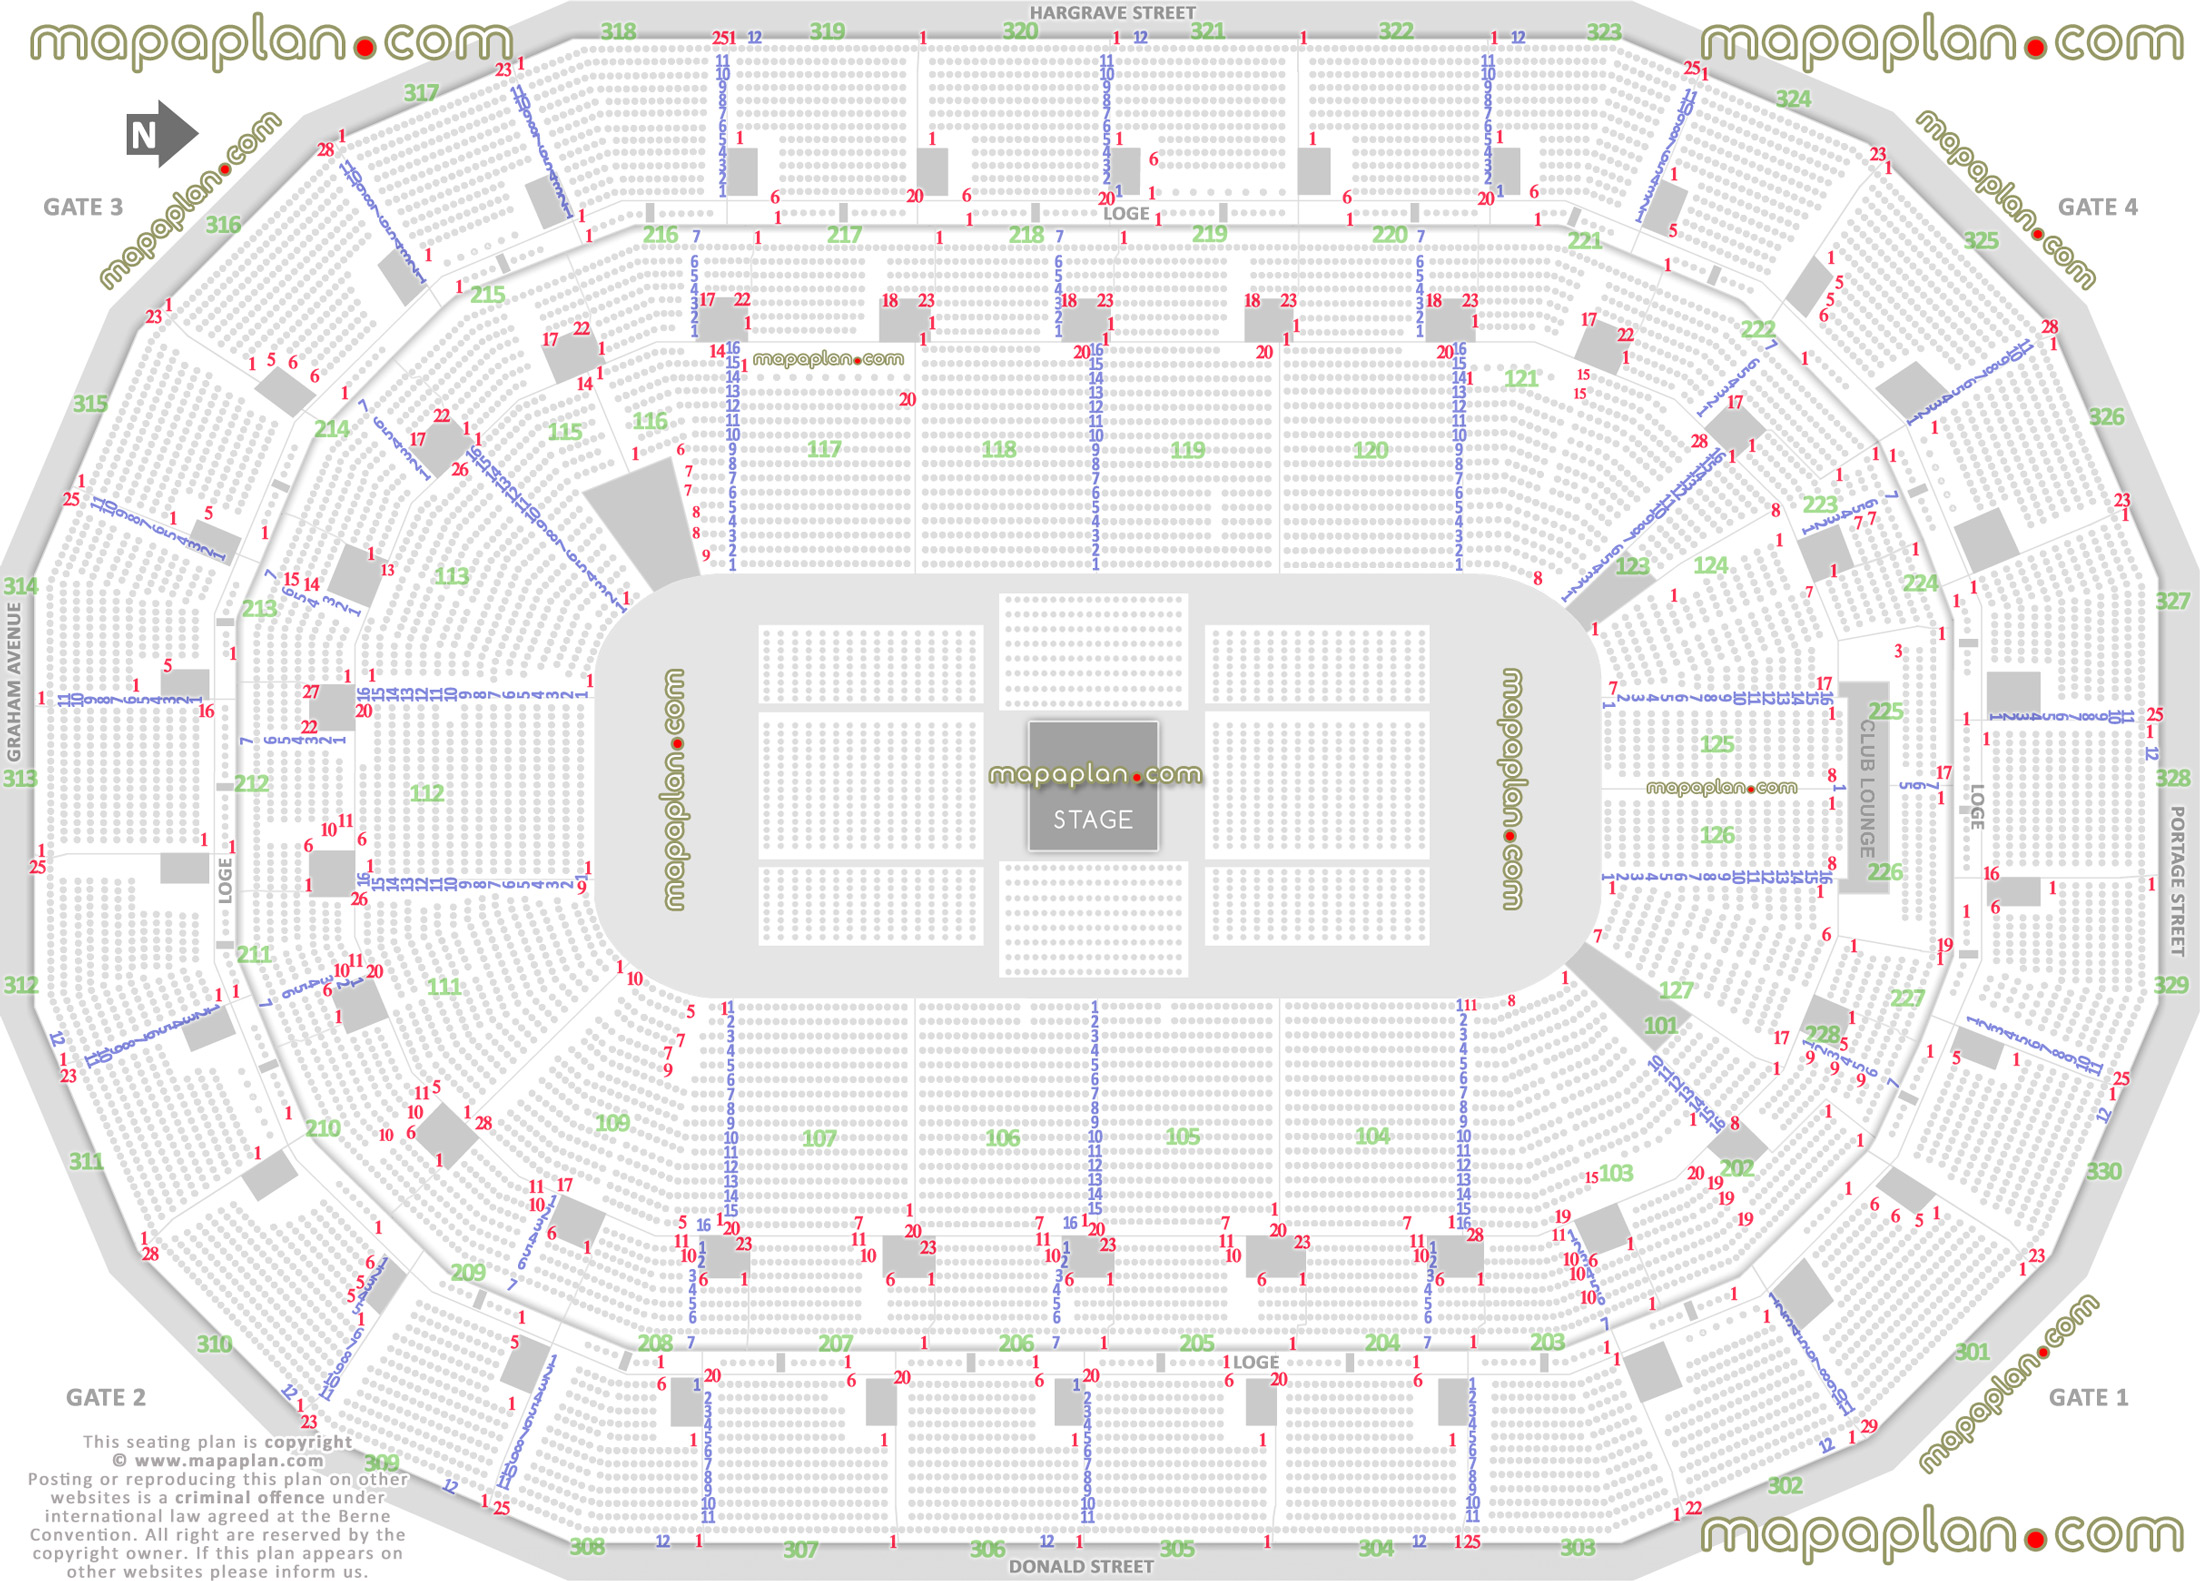 concert stage round 360 degree arrangement how many seats per row balcony sections 301 302 303 304 305 306 307 308 309 310 311 312 313 314 315 316 317 318 319 320 321 322 323 324 325 326 327 328 329 330 Winnipeg Canada Life Centre seating chart